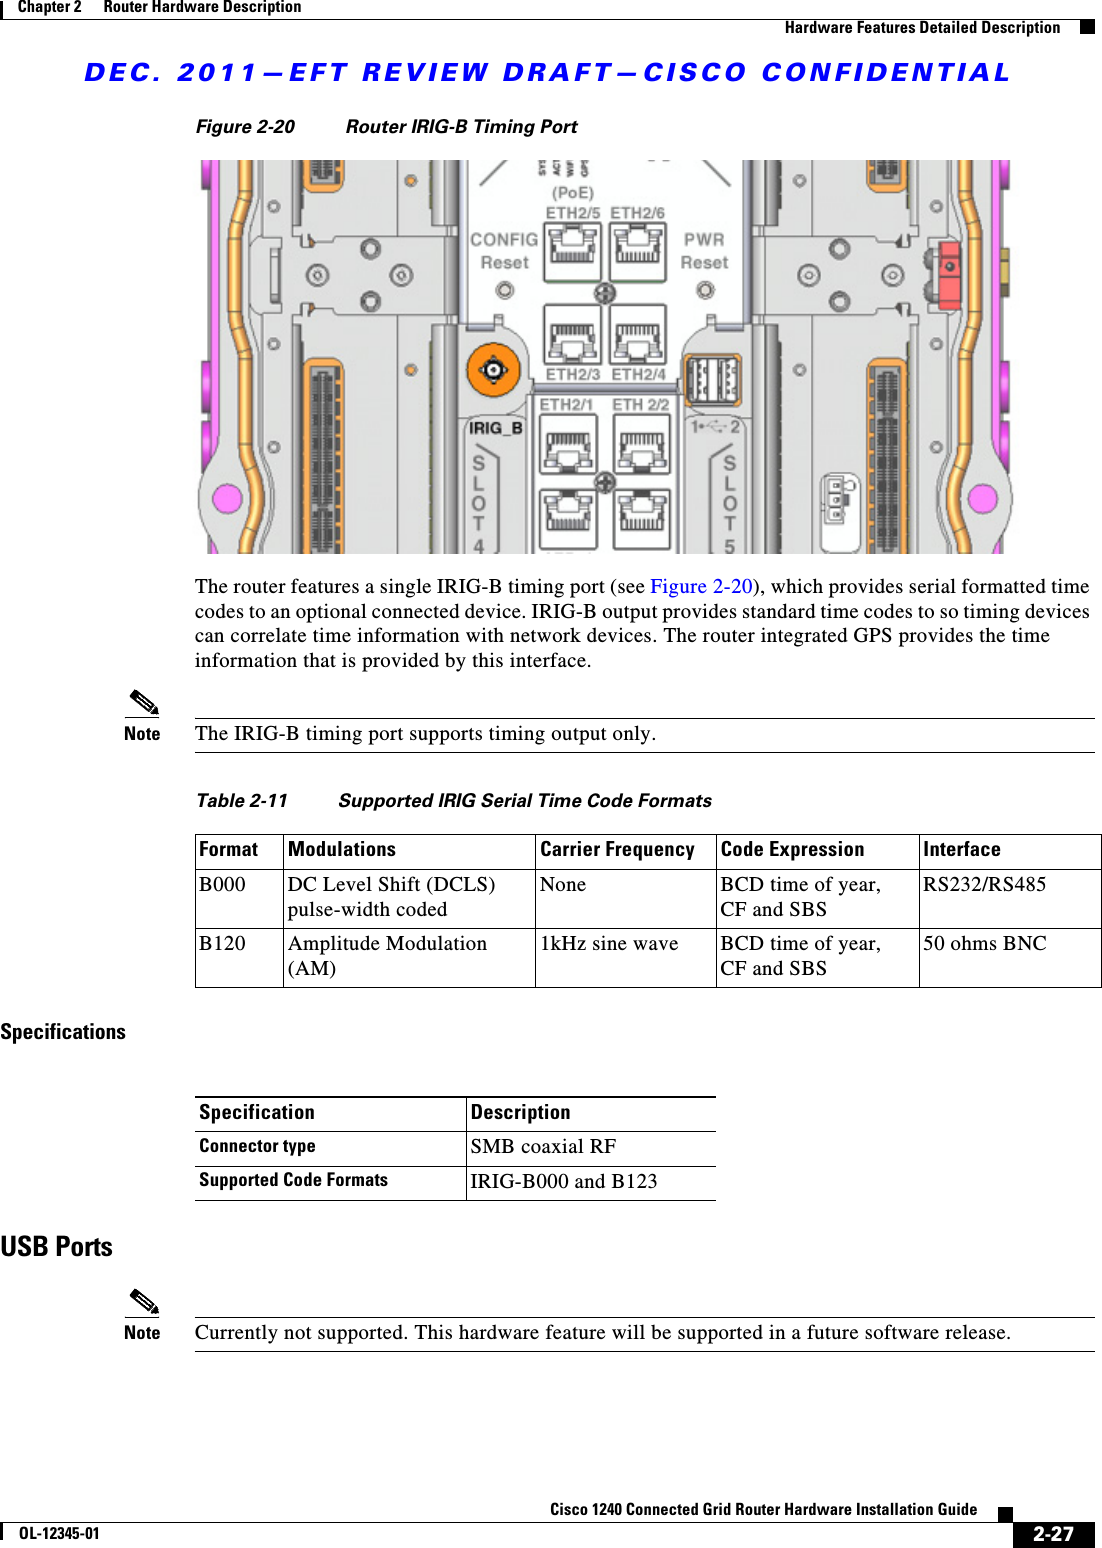 DEC. 2011—EFT REVIEW DRAFT—CISCO CONFIDENTIAL2-27Cisco 1240 Connected Grid Router Hardware Installation GuideOL-12345-01Chapter 2      Router Hardware Description  Hardware Features Detailed DescriptionFigure 2-20 Router IRIG-B Timing PortThe router features a single IRIG-B timing port (see Figure 2-20), which provides serial formatted time codes to an optional connected device. IRIG-B output provides standard time codes to so timing devices can correlate time information with network devices. The router integrated GPS provides the time information that is provided by this interface.Note The IRIG-B timing port supports timing output only.SpecificationsUSB PortsNote Currently not supported. This hardware feature will be supported in a future software release.Table 2-11 Supported IRIG Serial Time Code FormatsFormat Modulations Carrier Frequency Code Expression InterfaceB000 DC Level Shift (DCLS) pulse-width codedNone BCD time of year,  CF and SBSRS232/RS485B120 Amplitude Modulation (AM)1kHz sine wave BCD time of year,  CF and SBS50 ohms BNCSpecification DescriptionConnector type SMB coaxial RFSupported Code Formats IRIG-B000 and B123